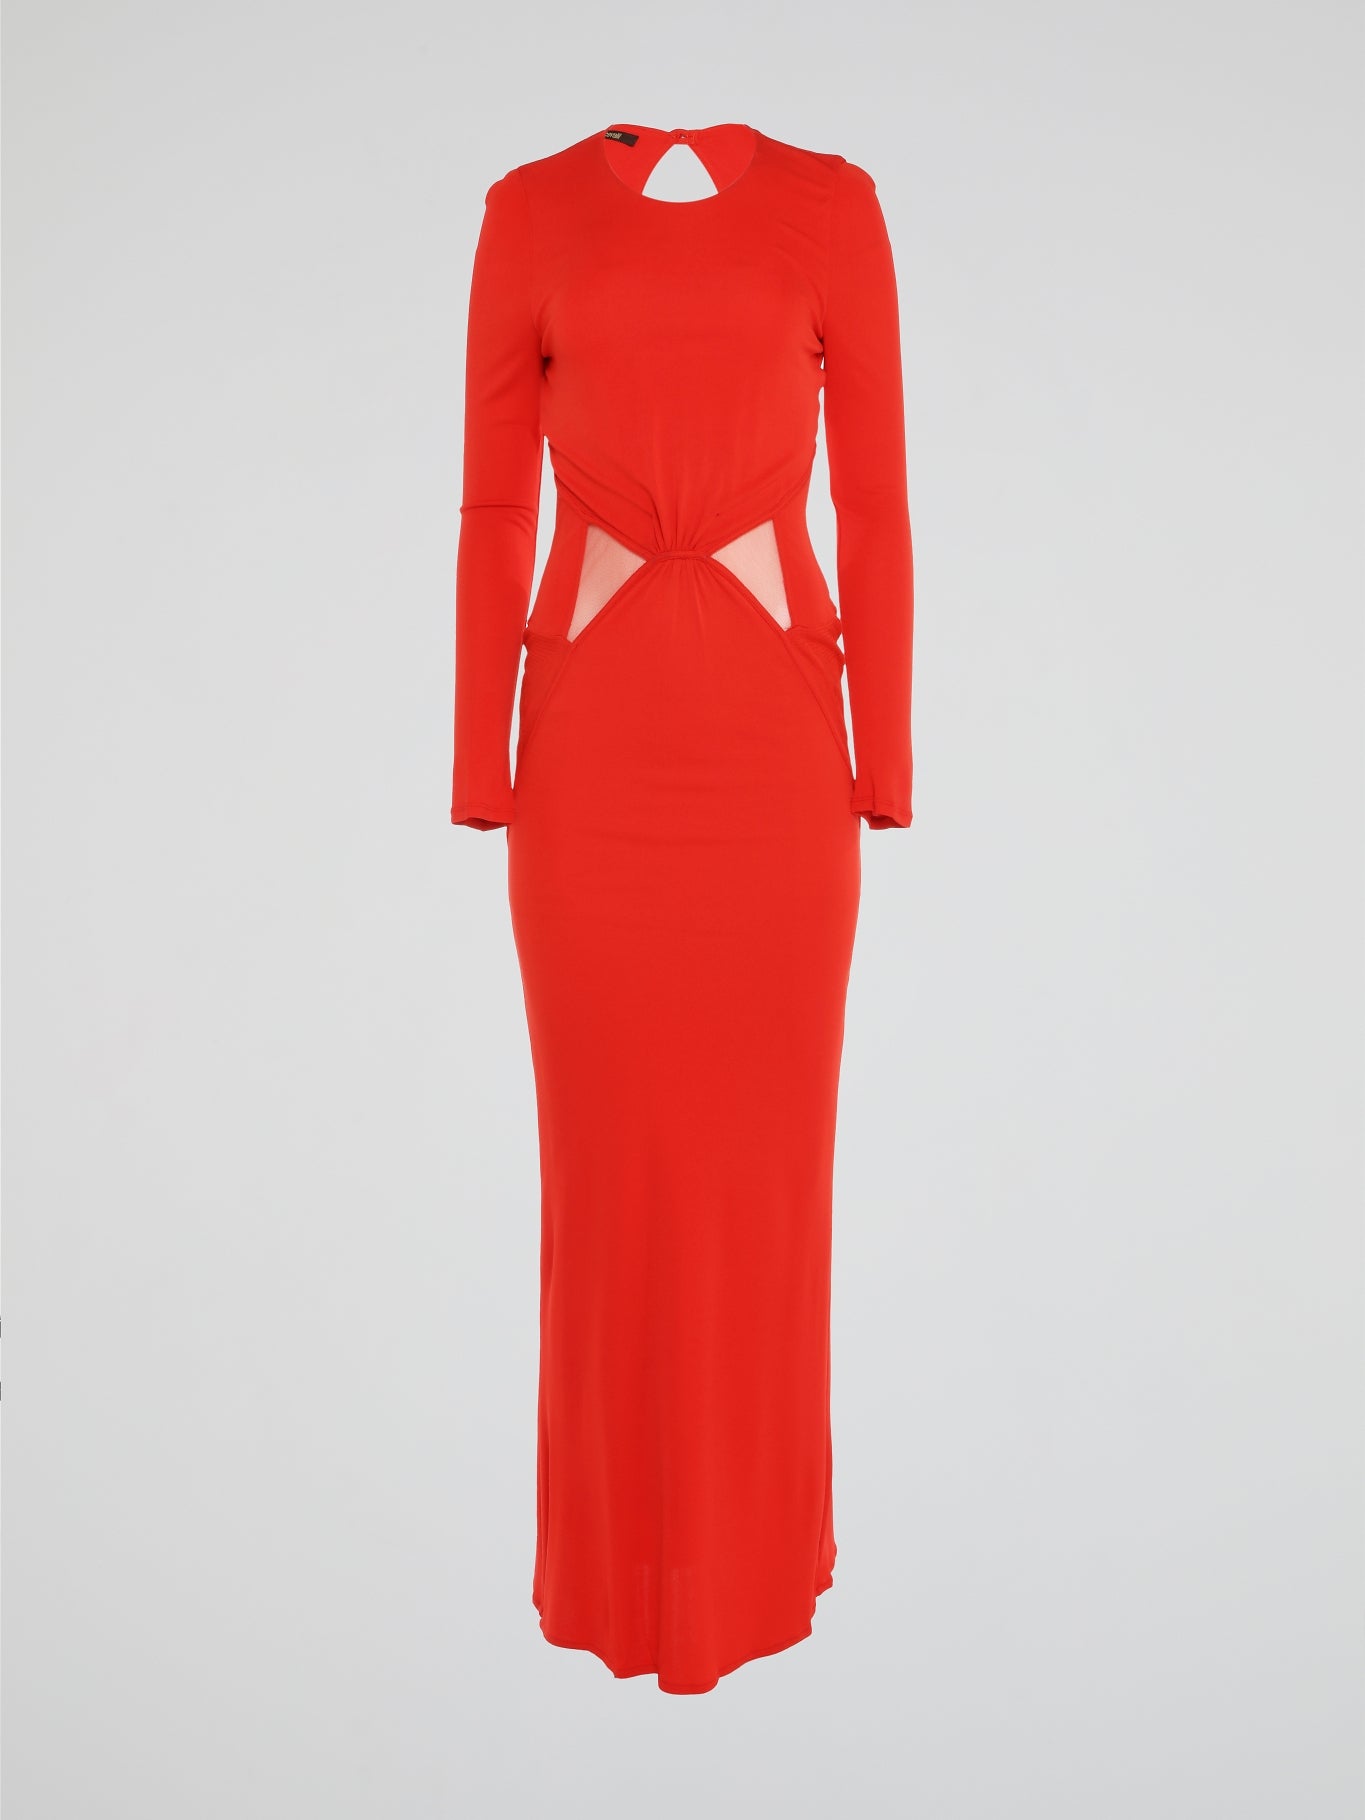 Introducing the Red Cut Out Long Sleeve Dress by Roberto Cavalli - a stunning masterpiece that combines elegance with a touch of daring. This eye-catching dress features strategically placed cut-outs that add a flirtatious allure, while the long sleeves provide a hint of mystery. Crafted with meticulous attention to detail, this luxurious dress is the perfect choice for the confident and sophisticated woman ready to make an unforgettable statement.